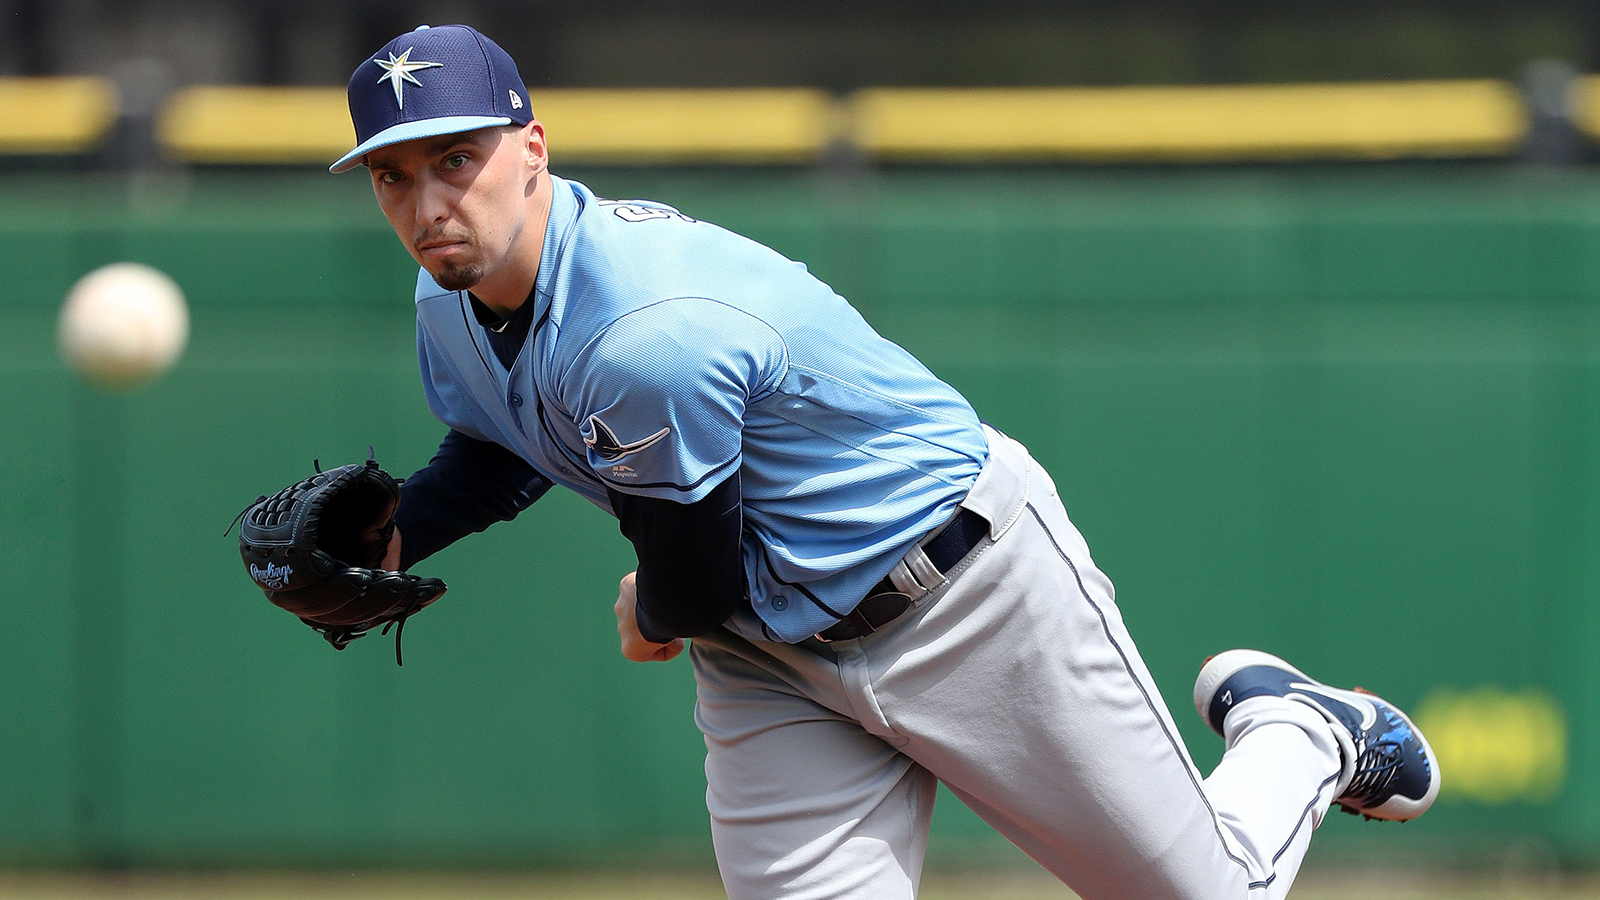 Rays ace Blake Snell keeping his focus on following up dominant 2018, not on contract